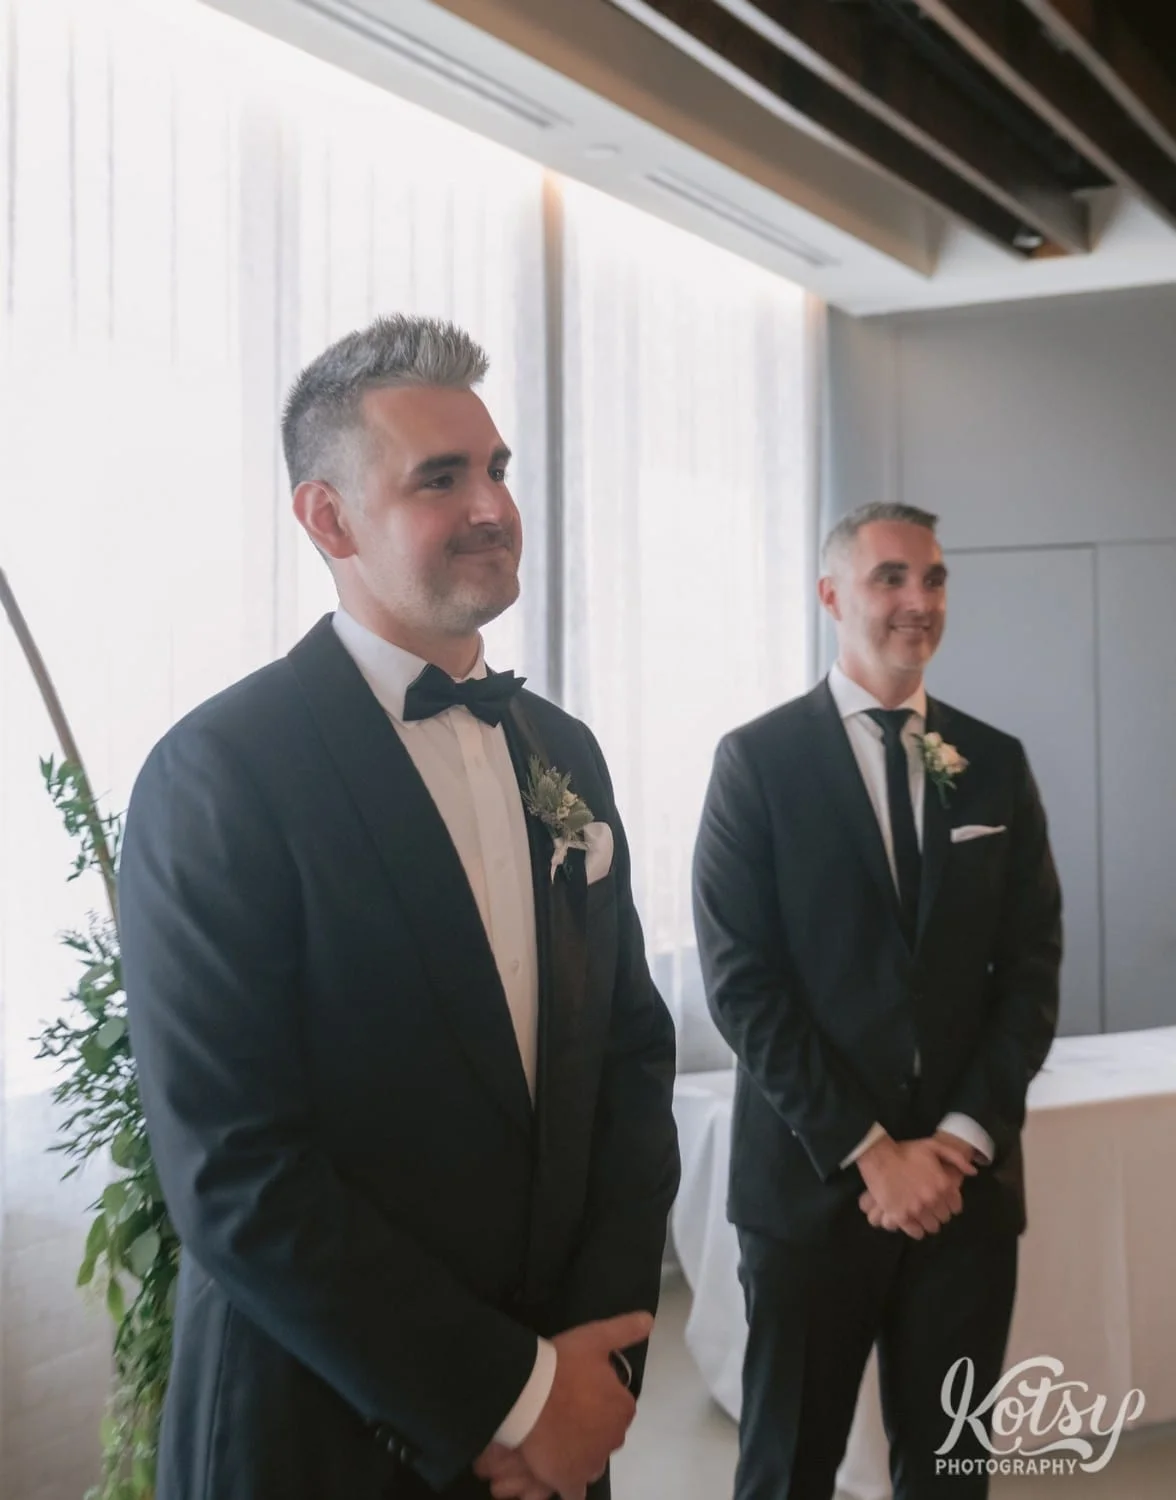 A groom is smiling as he watches his bride walk down the aisle during his Village Loft wedding ceremony in Toronto, Canada